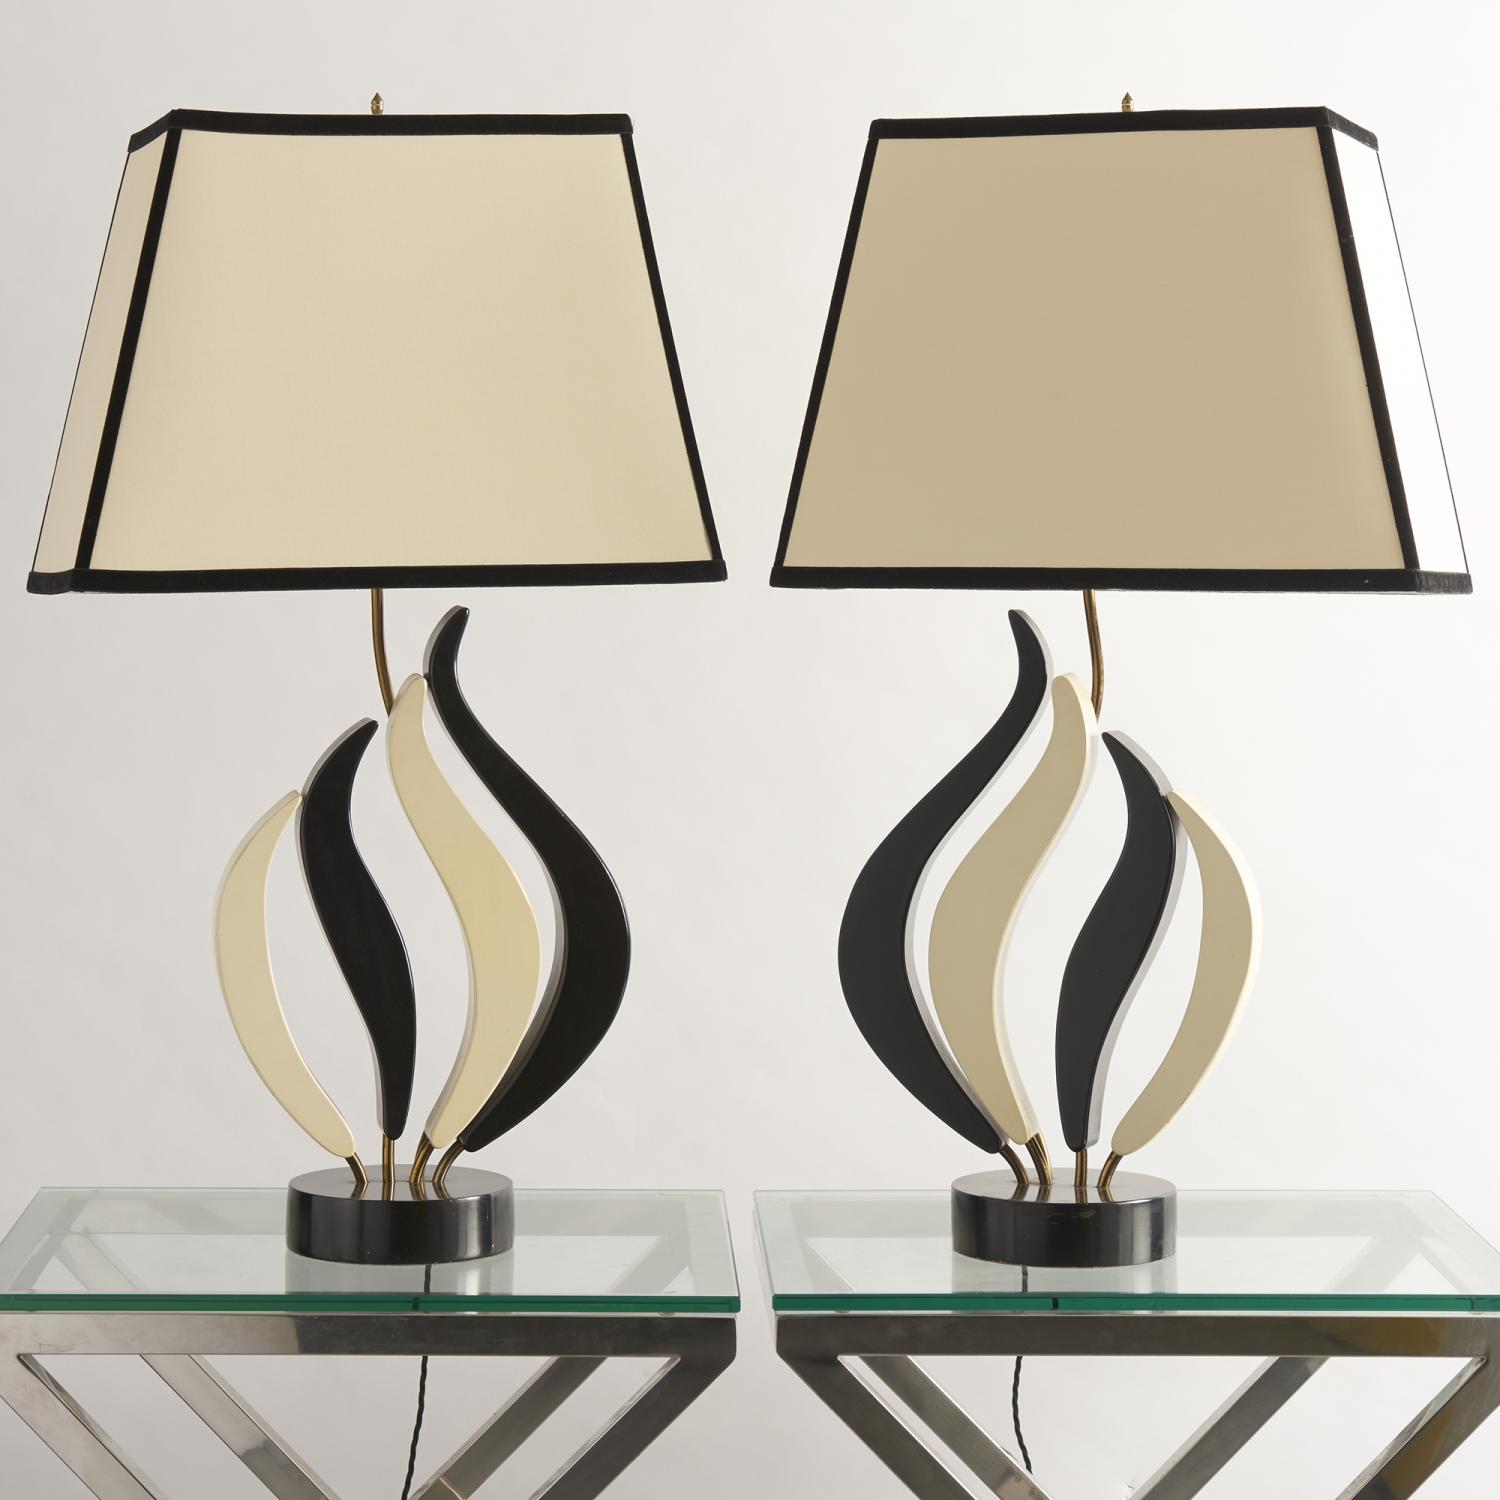 Majestic table lamps